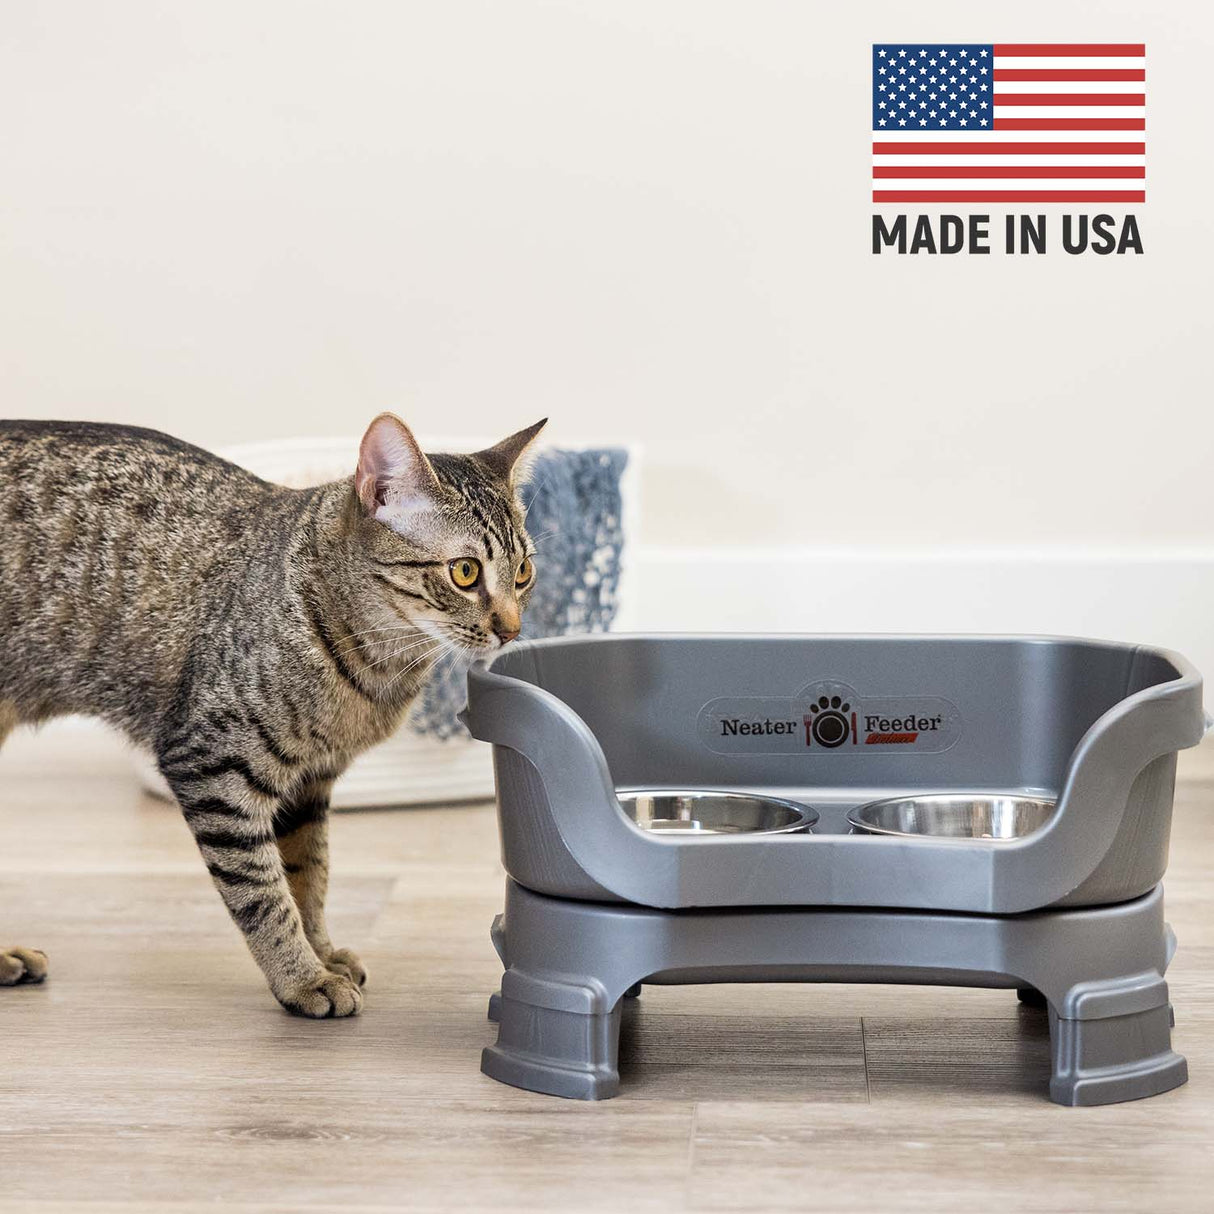 Cat next to Gunmetal Neater Feeder Deluxe - Made in the USA